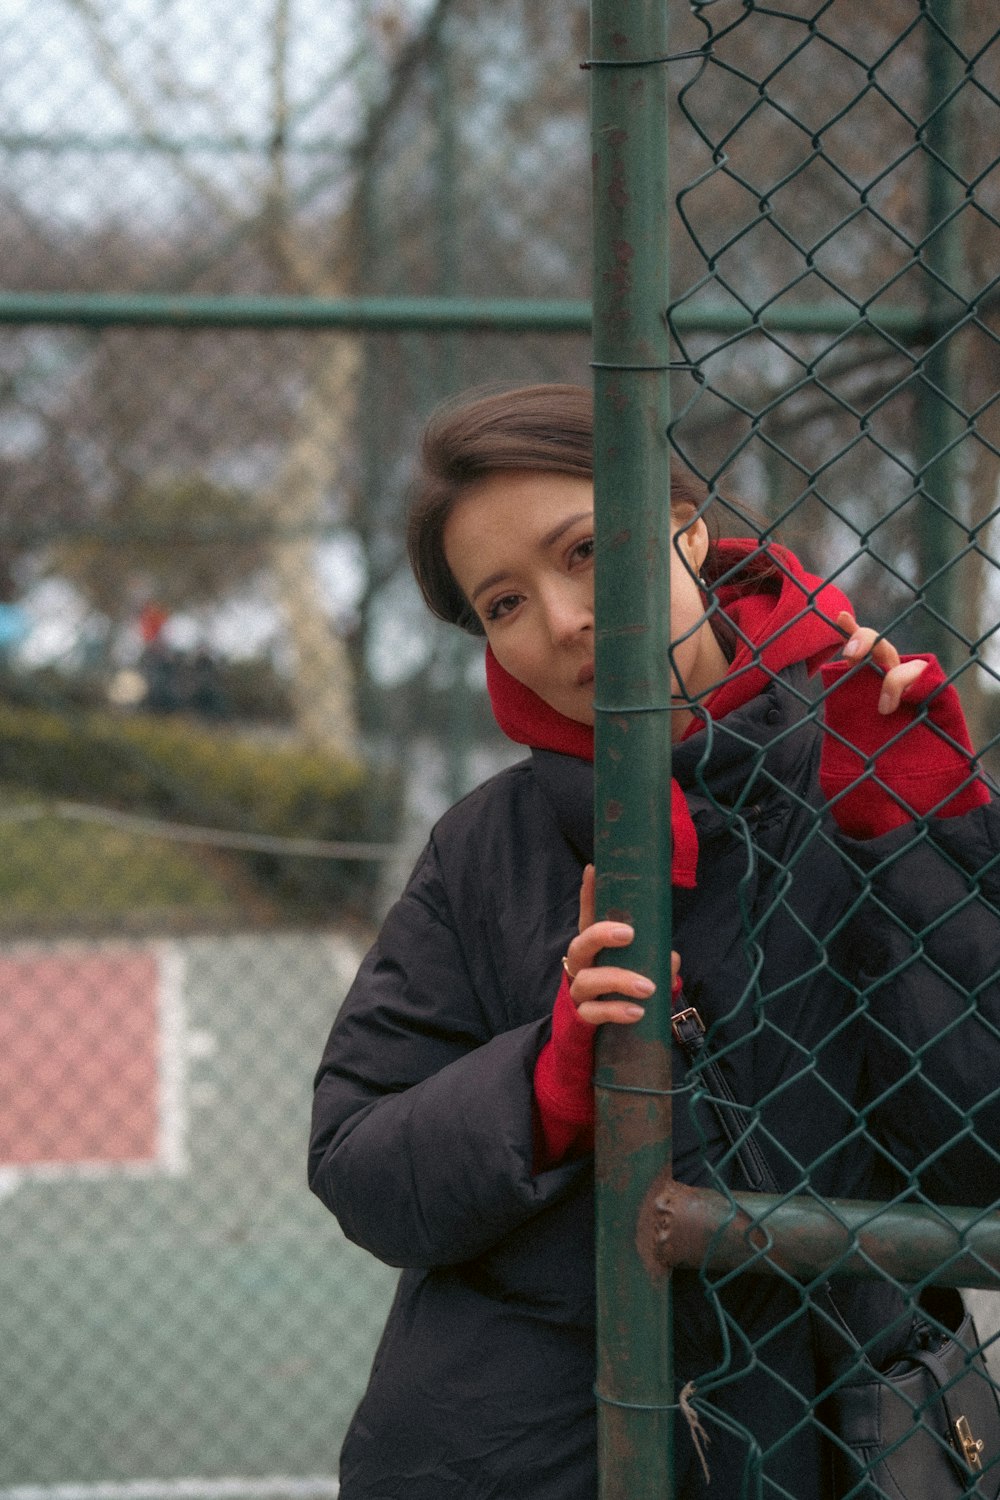 a woman leaning against a fence with her hand on the side of the fence